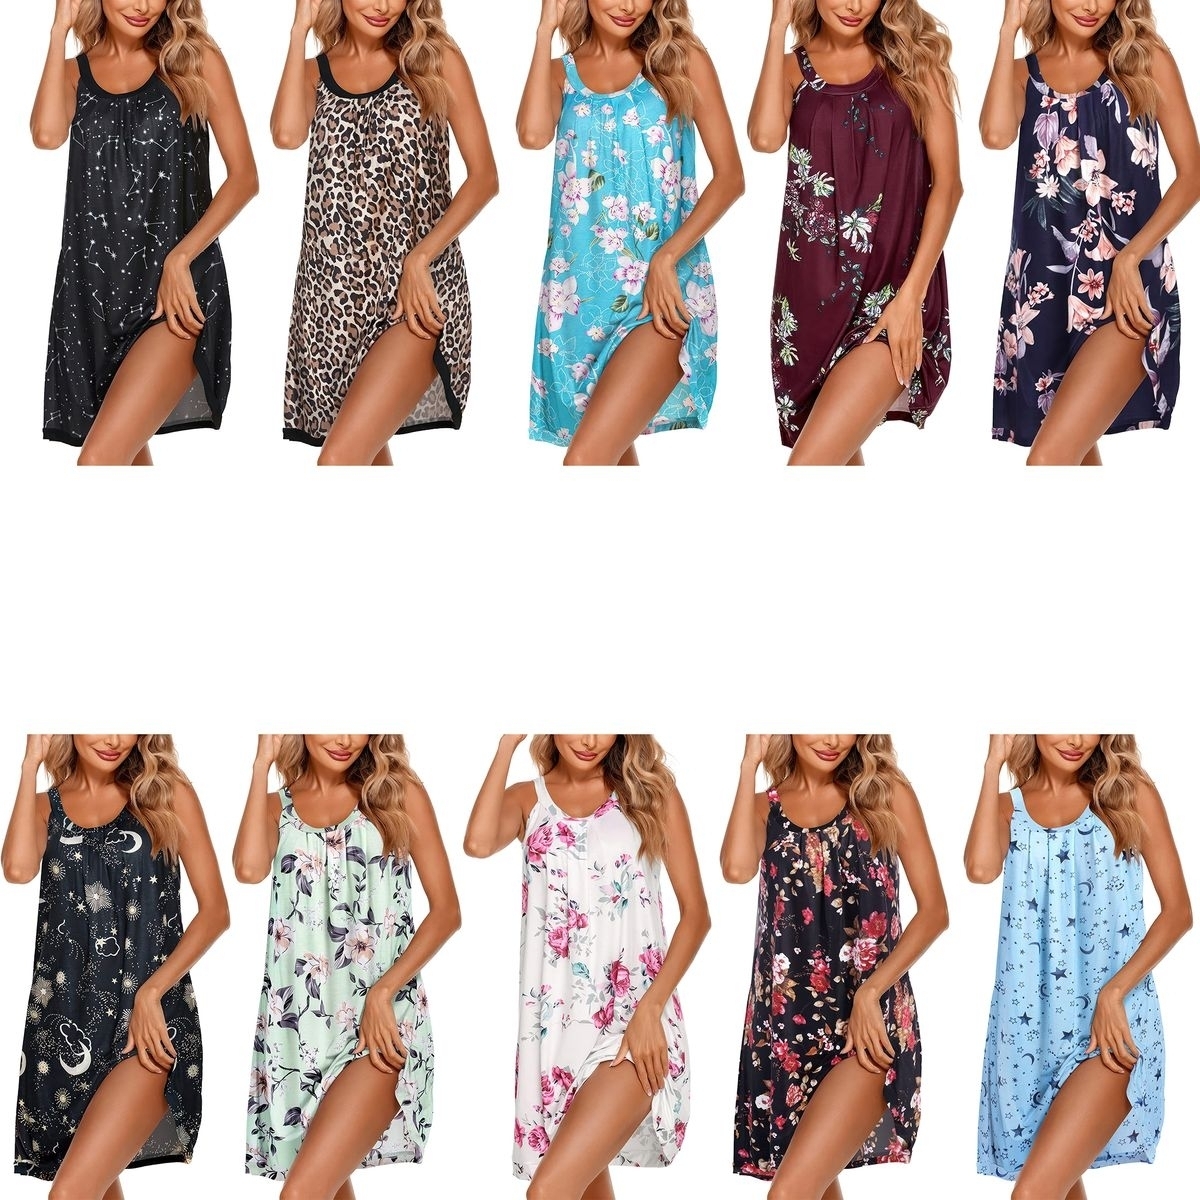 4-Pack: Women's Ultra-Soft Cozy Sleeveless Loose Fit Lightweight Cozy Nightgown SleepShirt - X-large, Floral